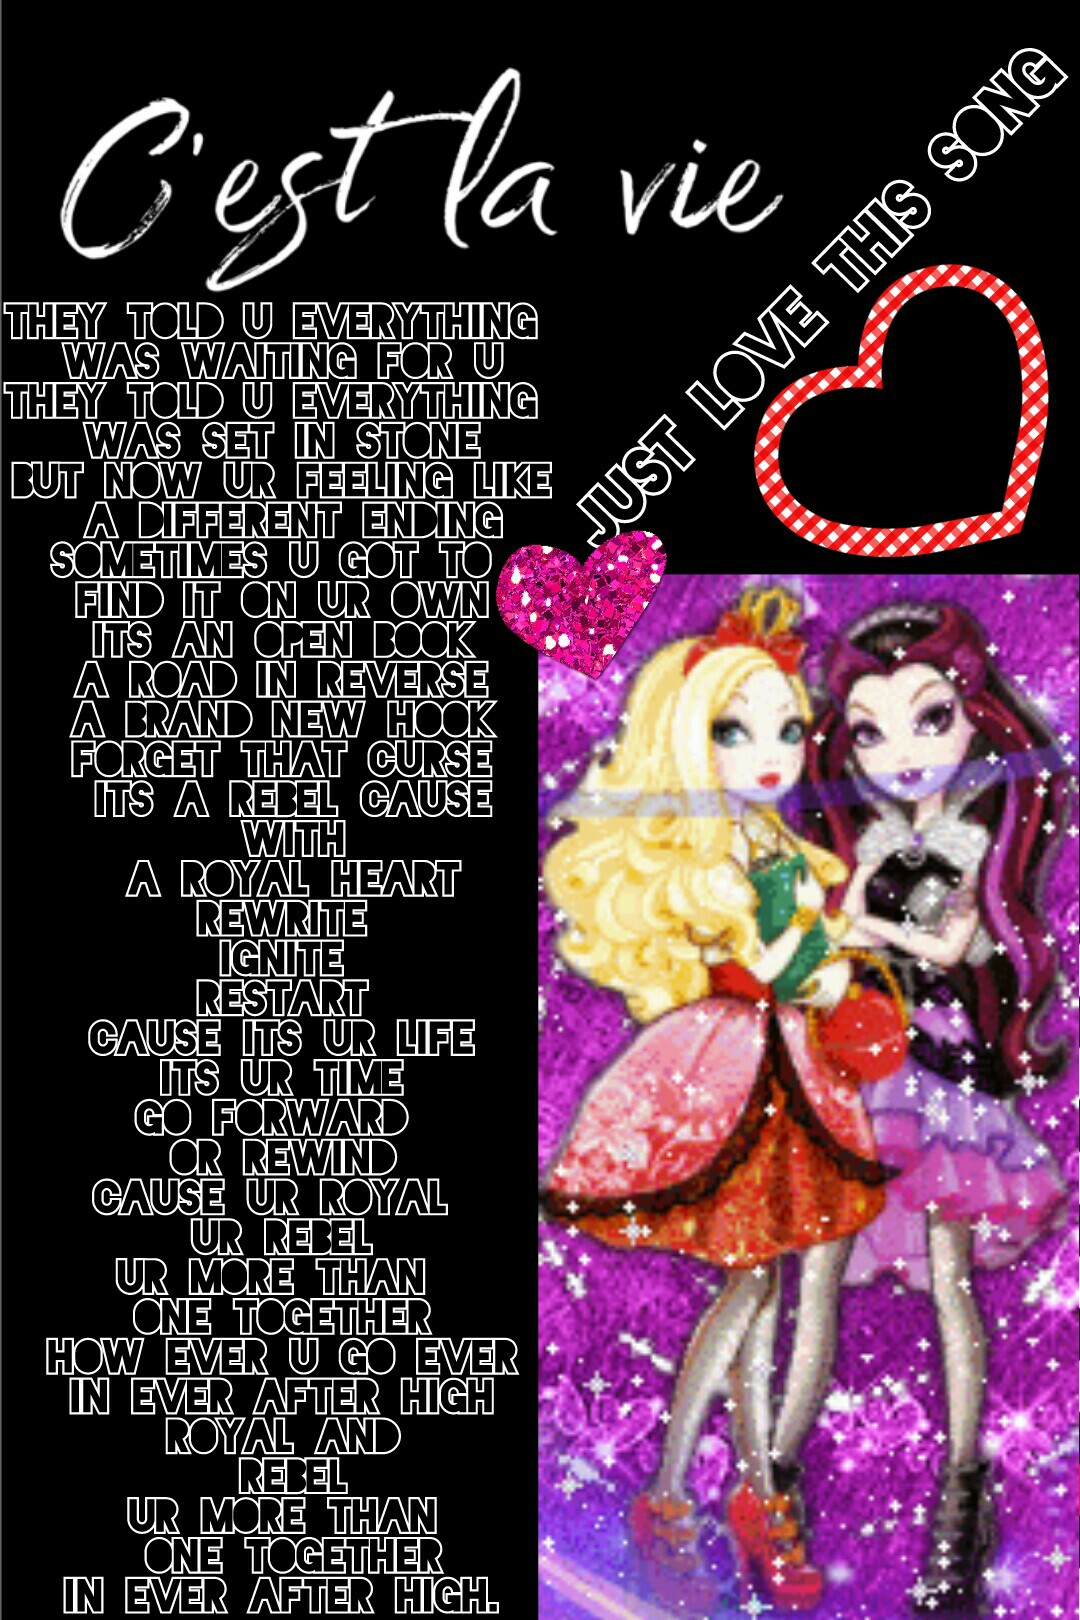 JUST LOVE THIS SONG 
ever after high💖💘💝💟